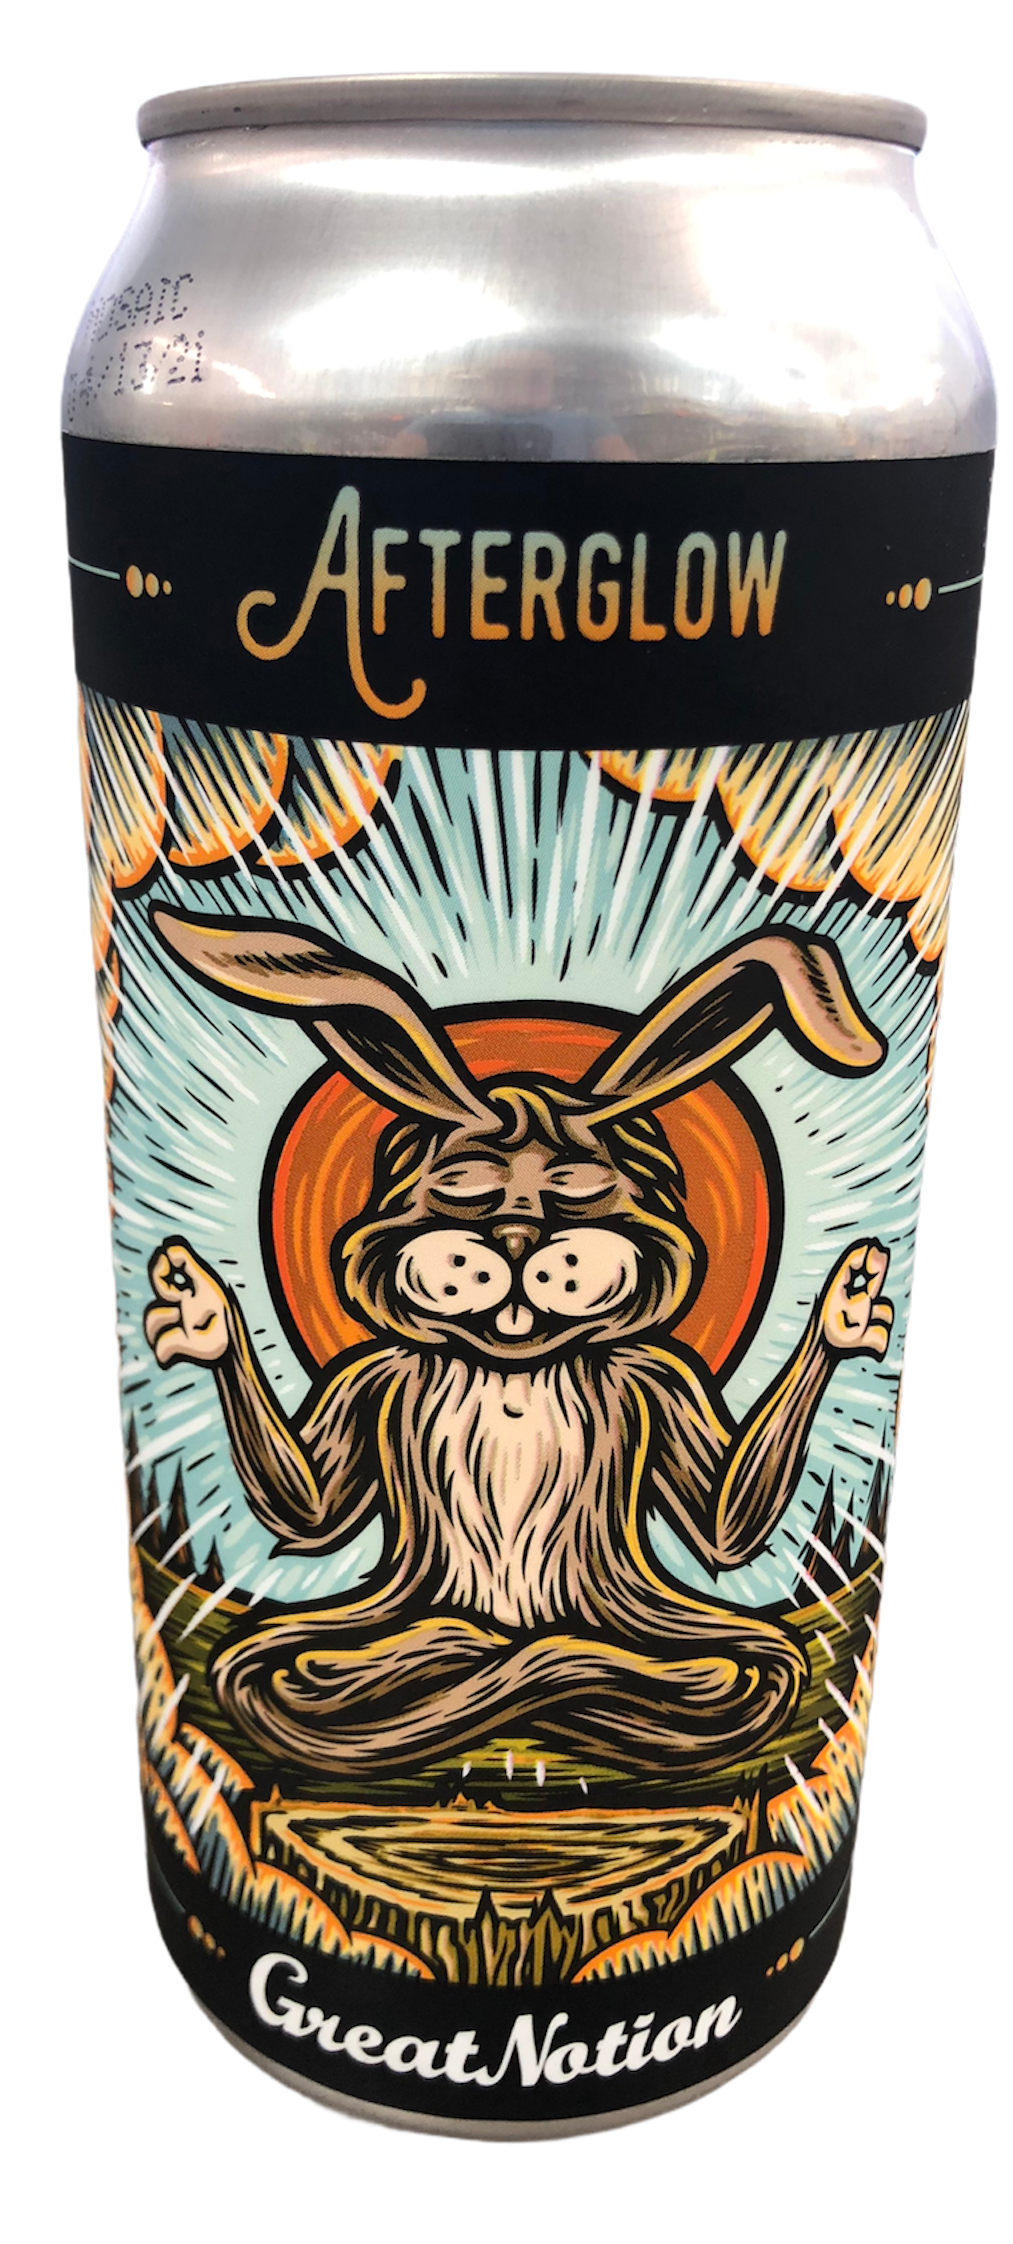 Buy Great Notion Afterglow Online -Craft City